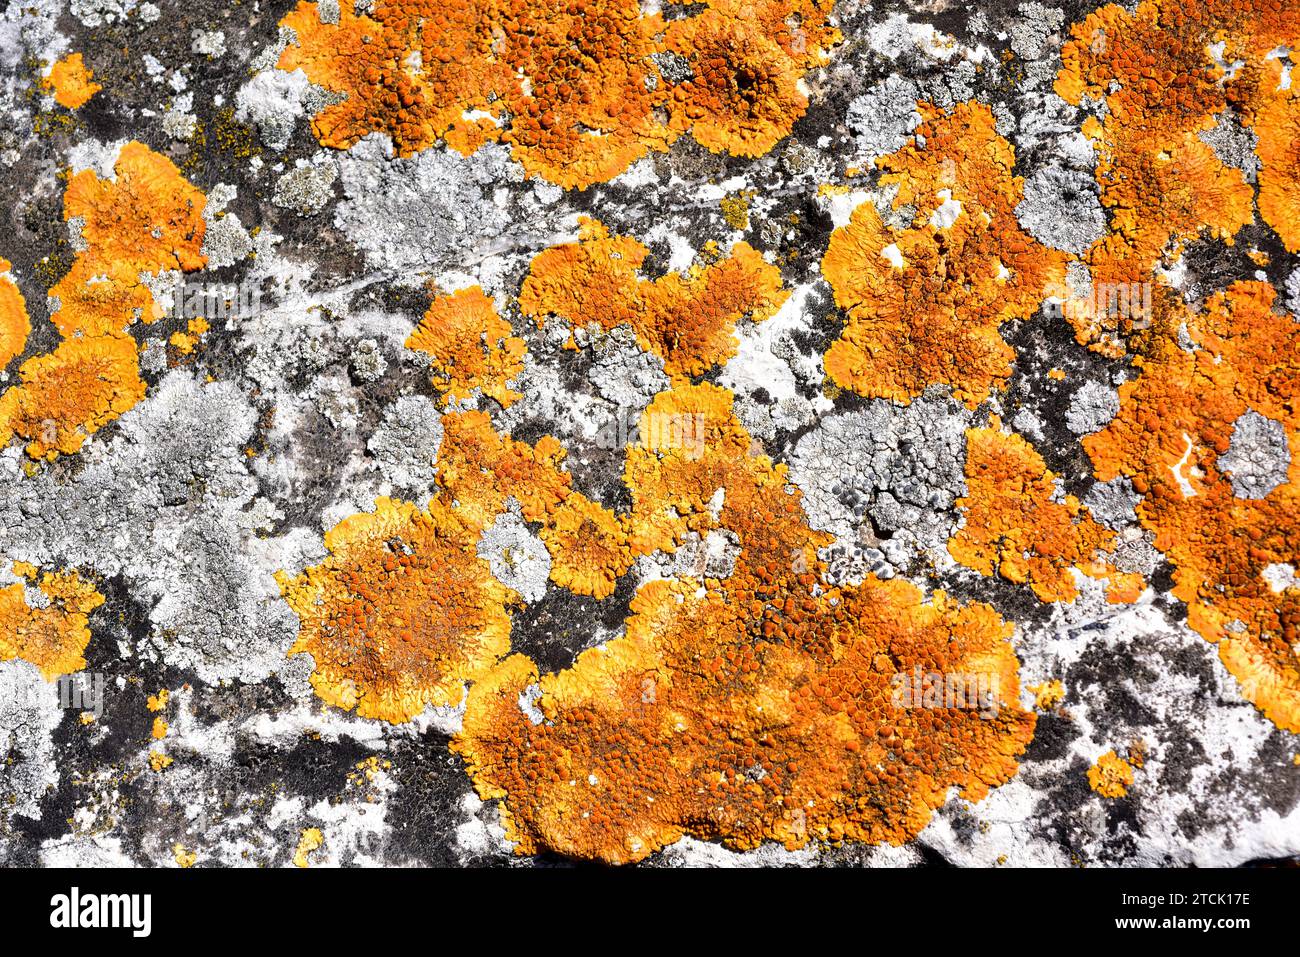 Caloplaca flavescens is a crustose placodioid lichen that grows on calcareous rocks. Other lichens presents are Aspicilia (grey) and Verrucaria (black Stock Photo